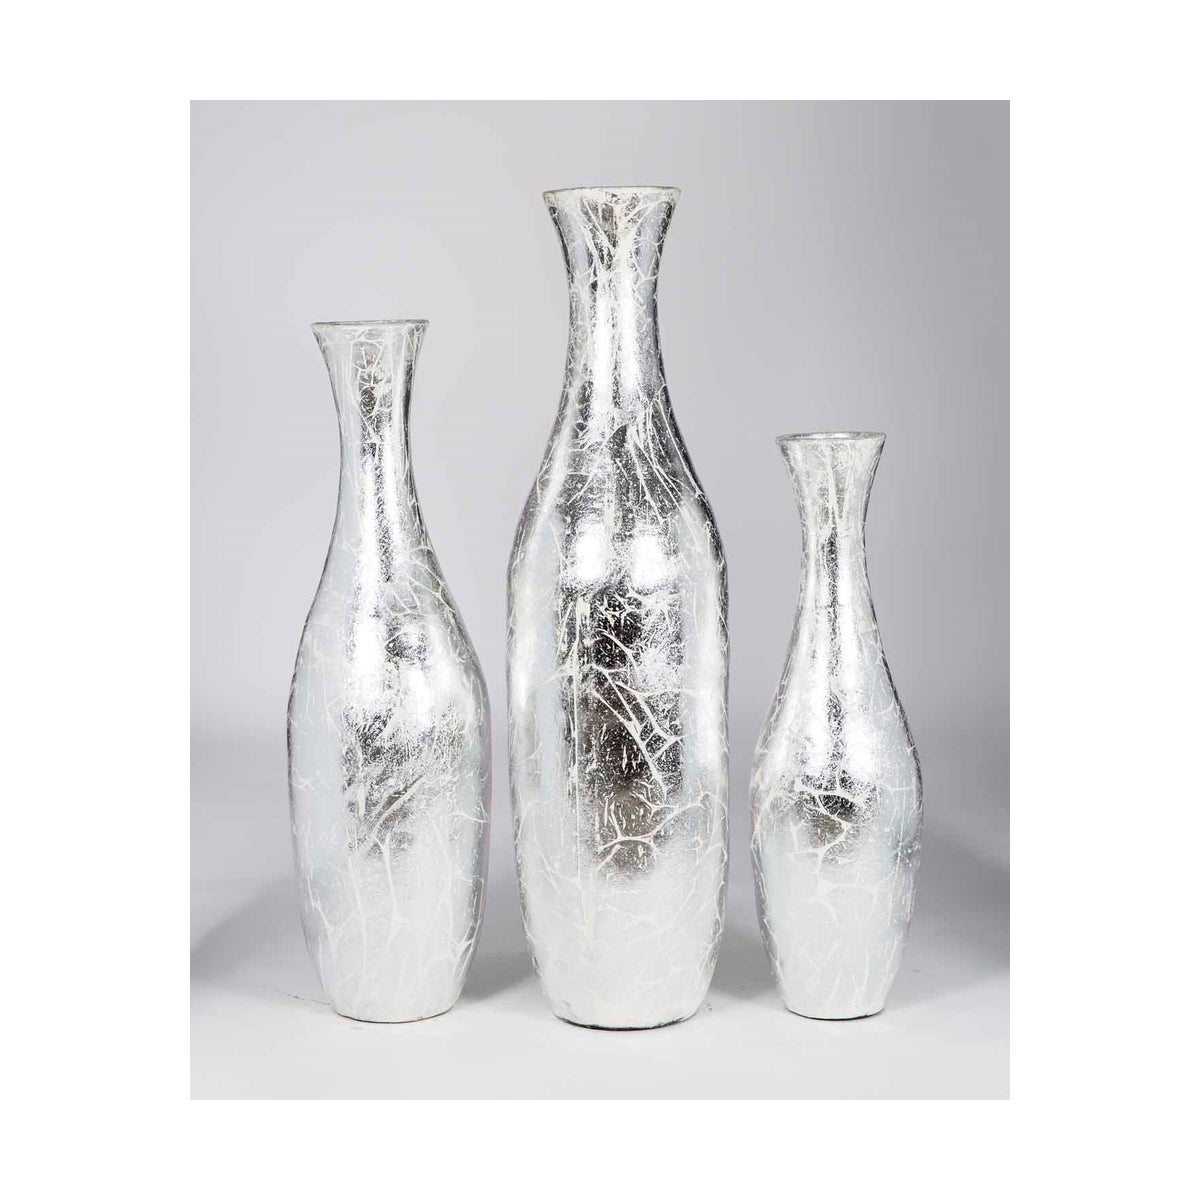 Set of 3 Floor Jugs in Silver Crackle Finish